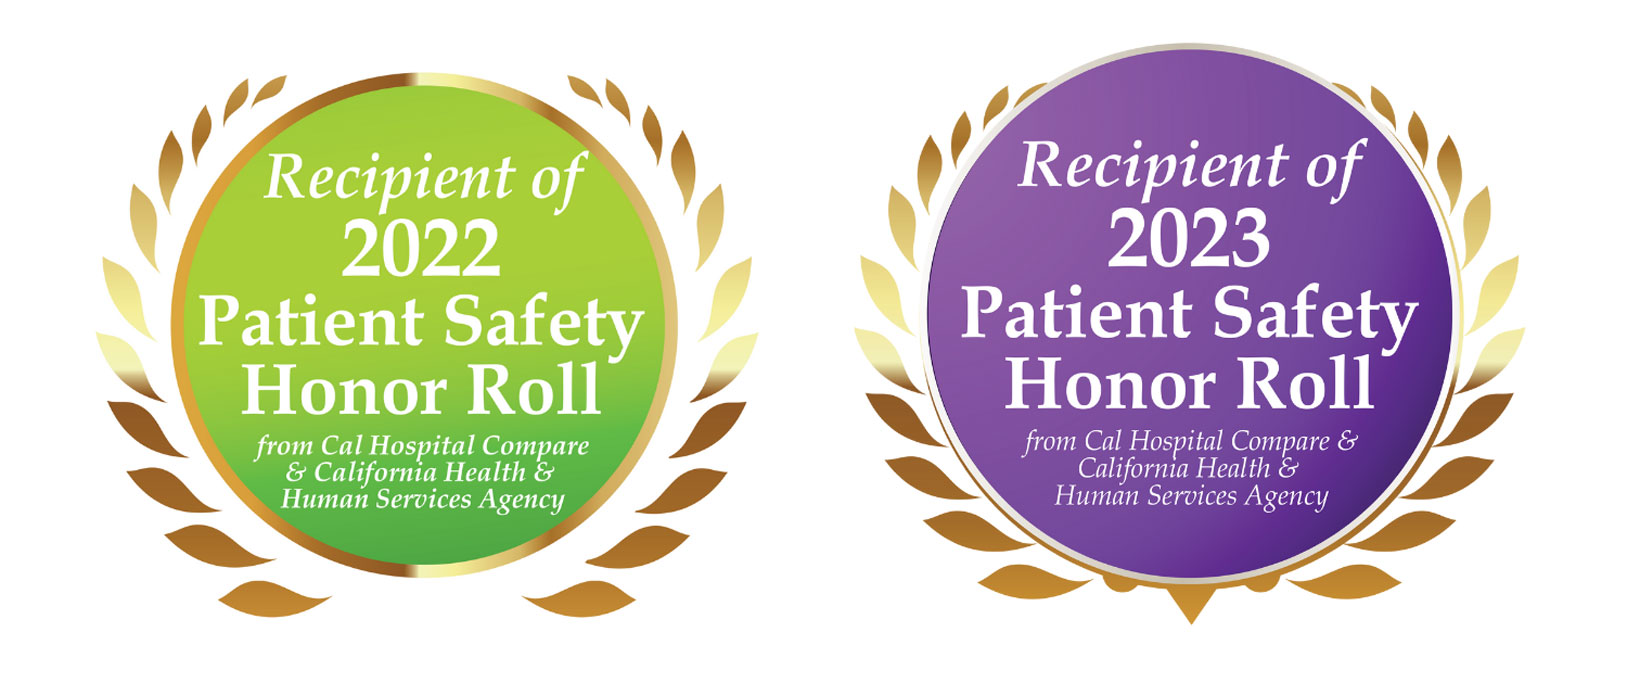 Recipient of 2023 Patient Safety Honor Roll from Cal Hospital Compare & Califonria Health & Human Services Agency